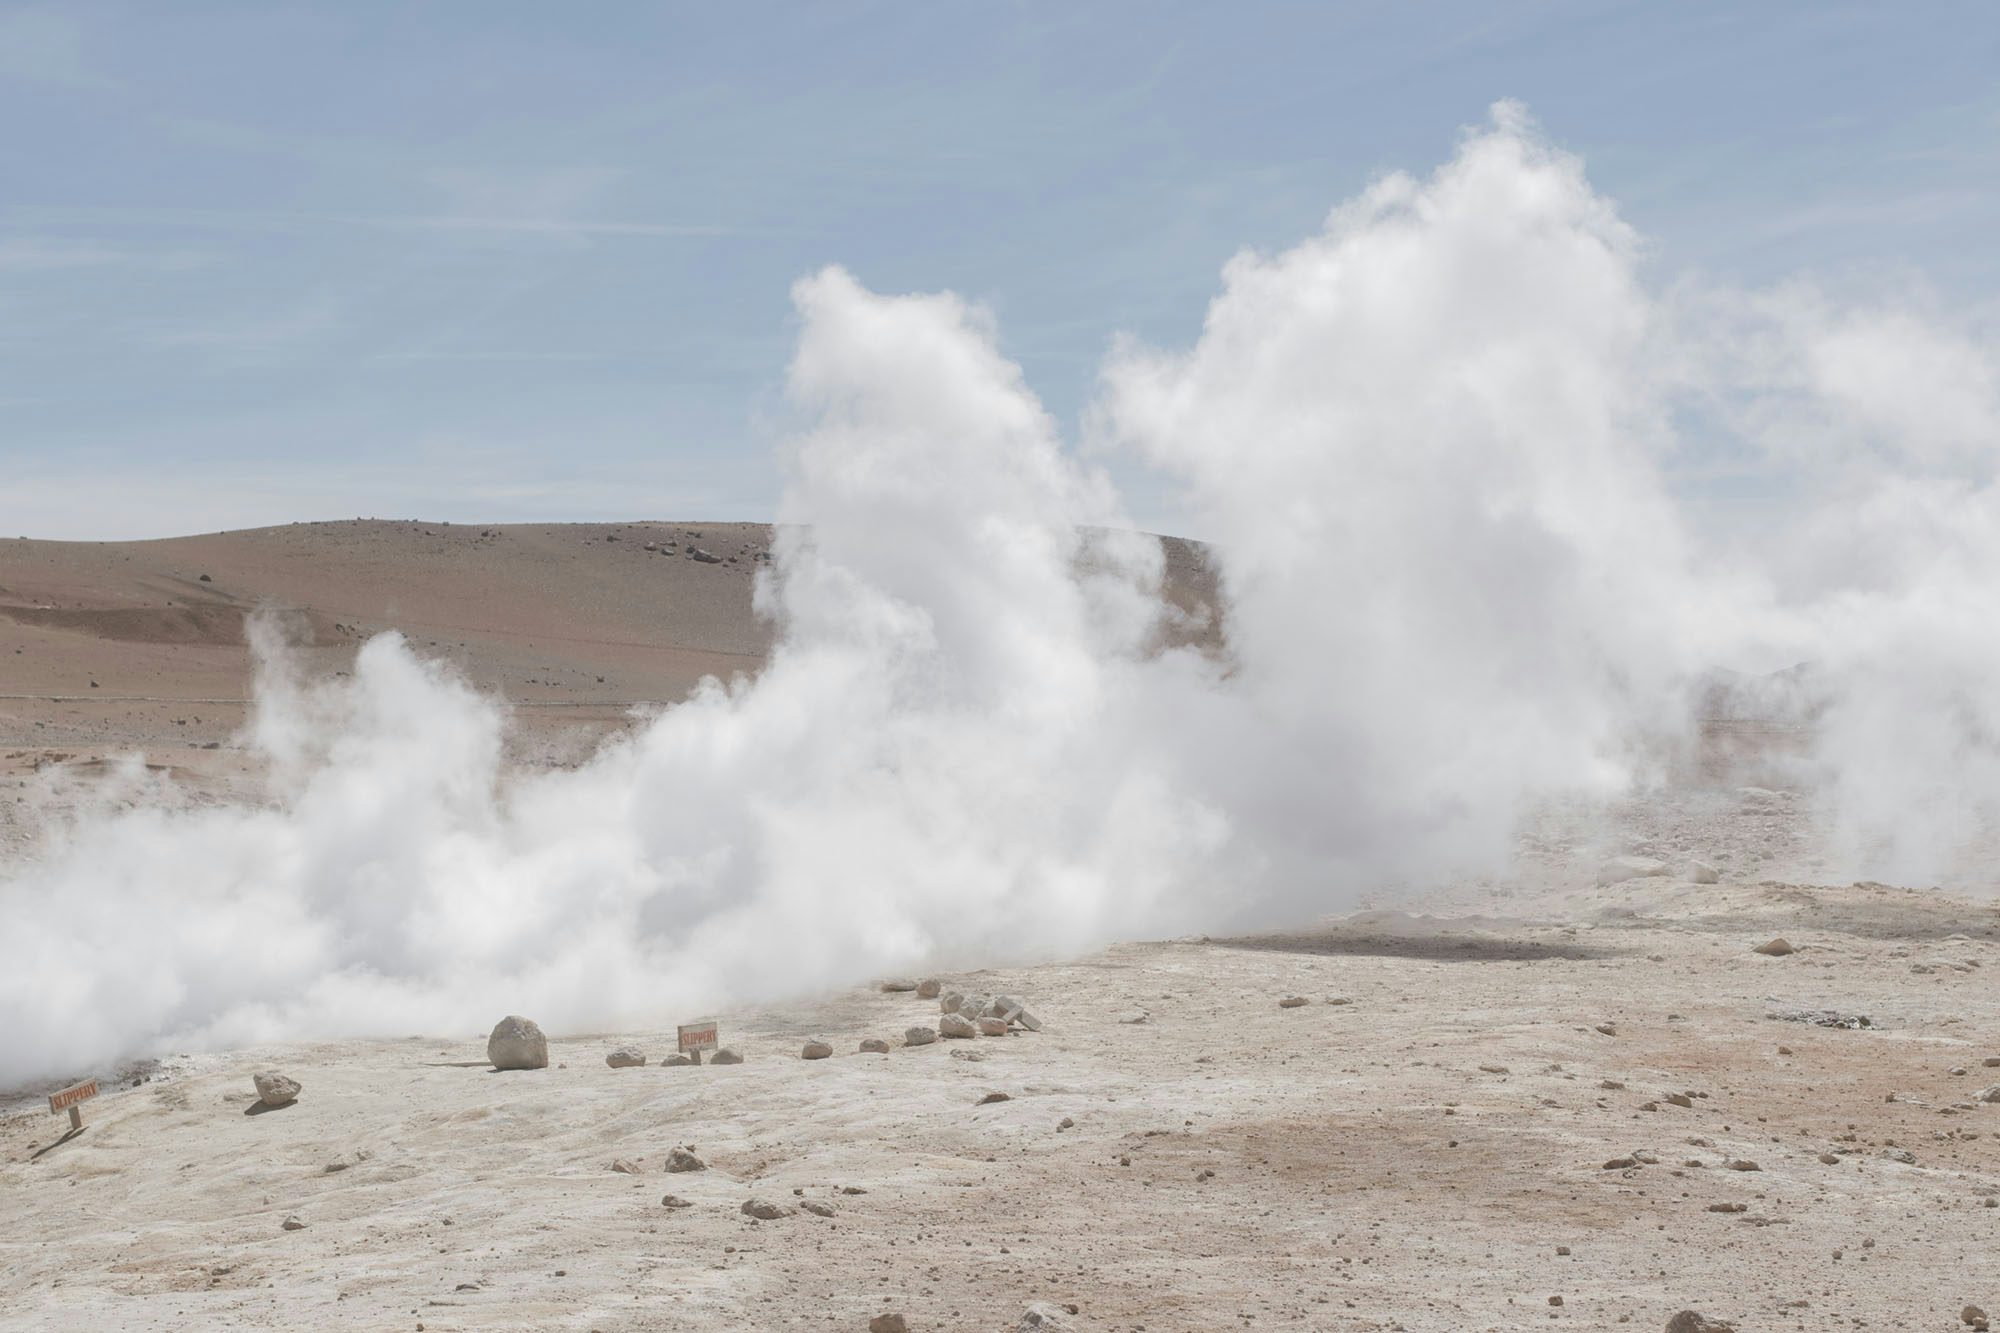 Image by River Claure showing a cloud of smoke filling a desert landscape